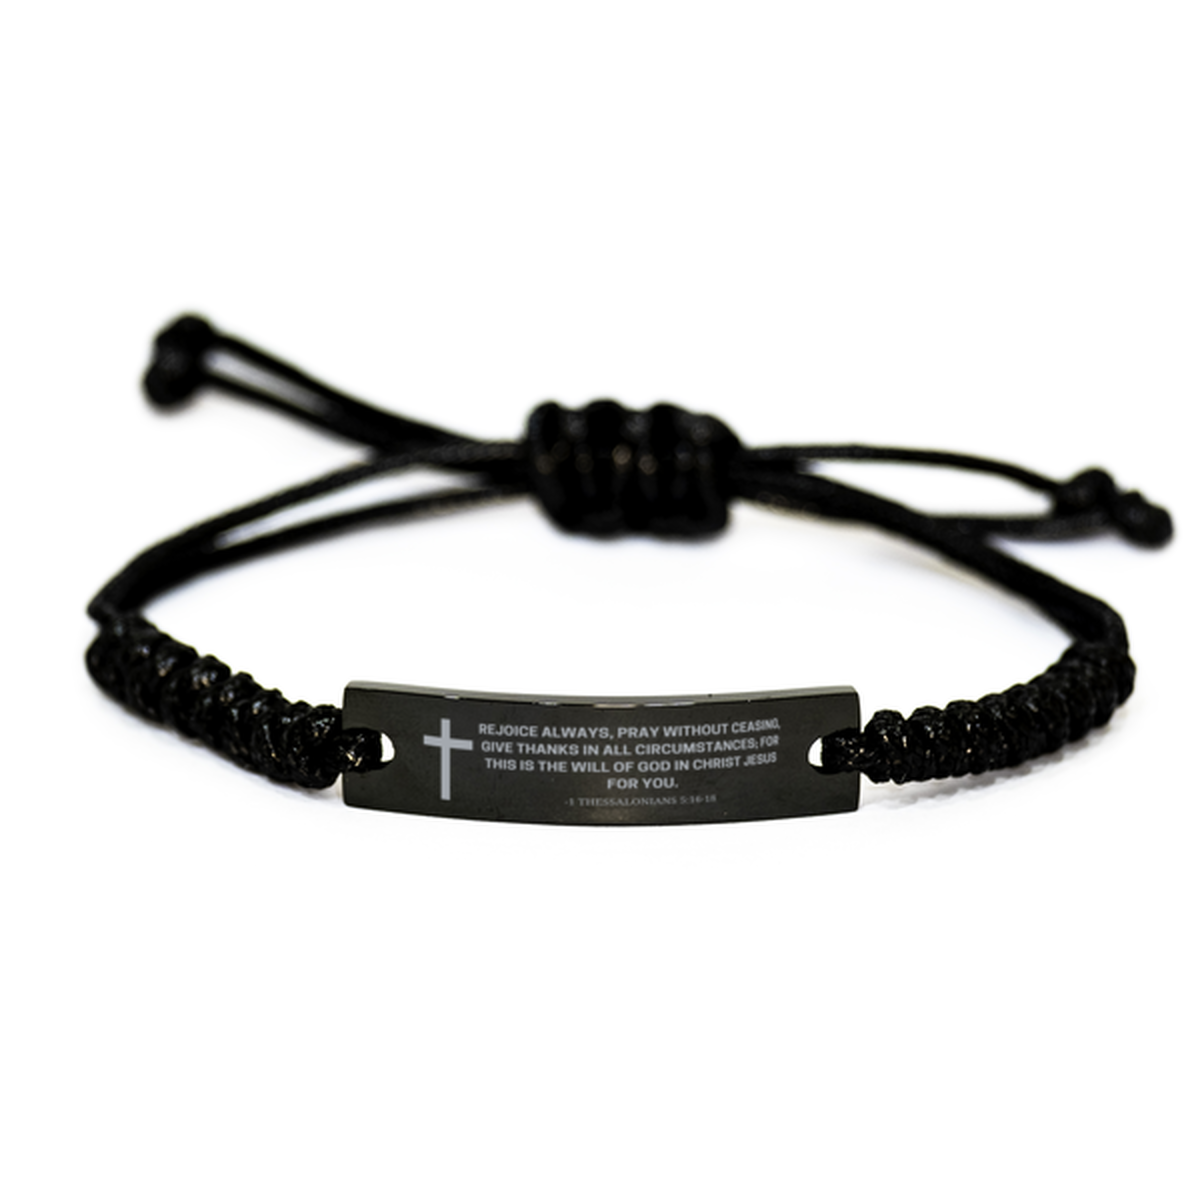 Baptism Gifts For Teenage Boys Girls, Christian Bible Verse Black Rope Bracelet, Rejoice always, pray without ceasing, Catholic Confirmation Gifts for Son, Godson, Grandson, Nephew